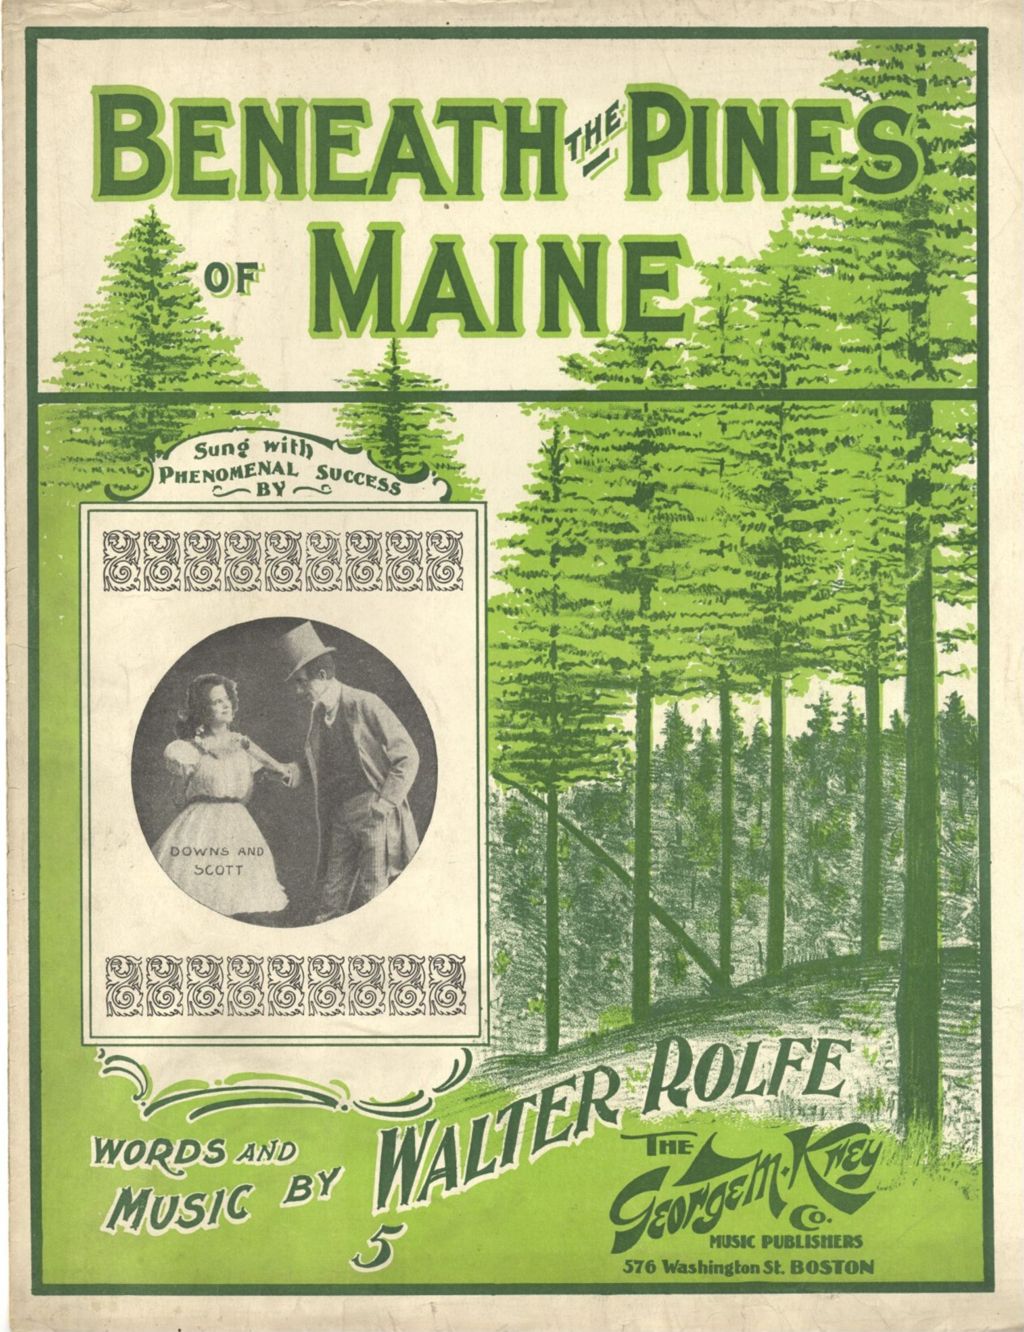 Miniature of Beneath the Pines of Maine